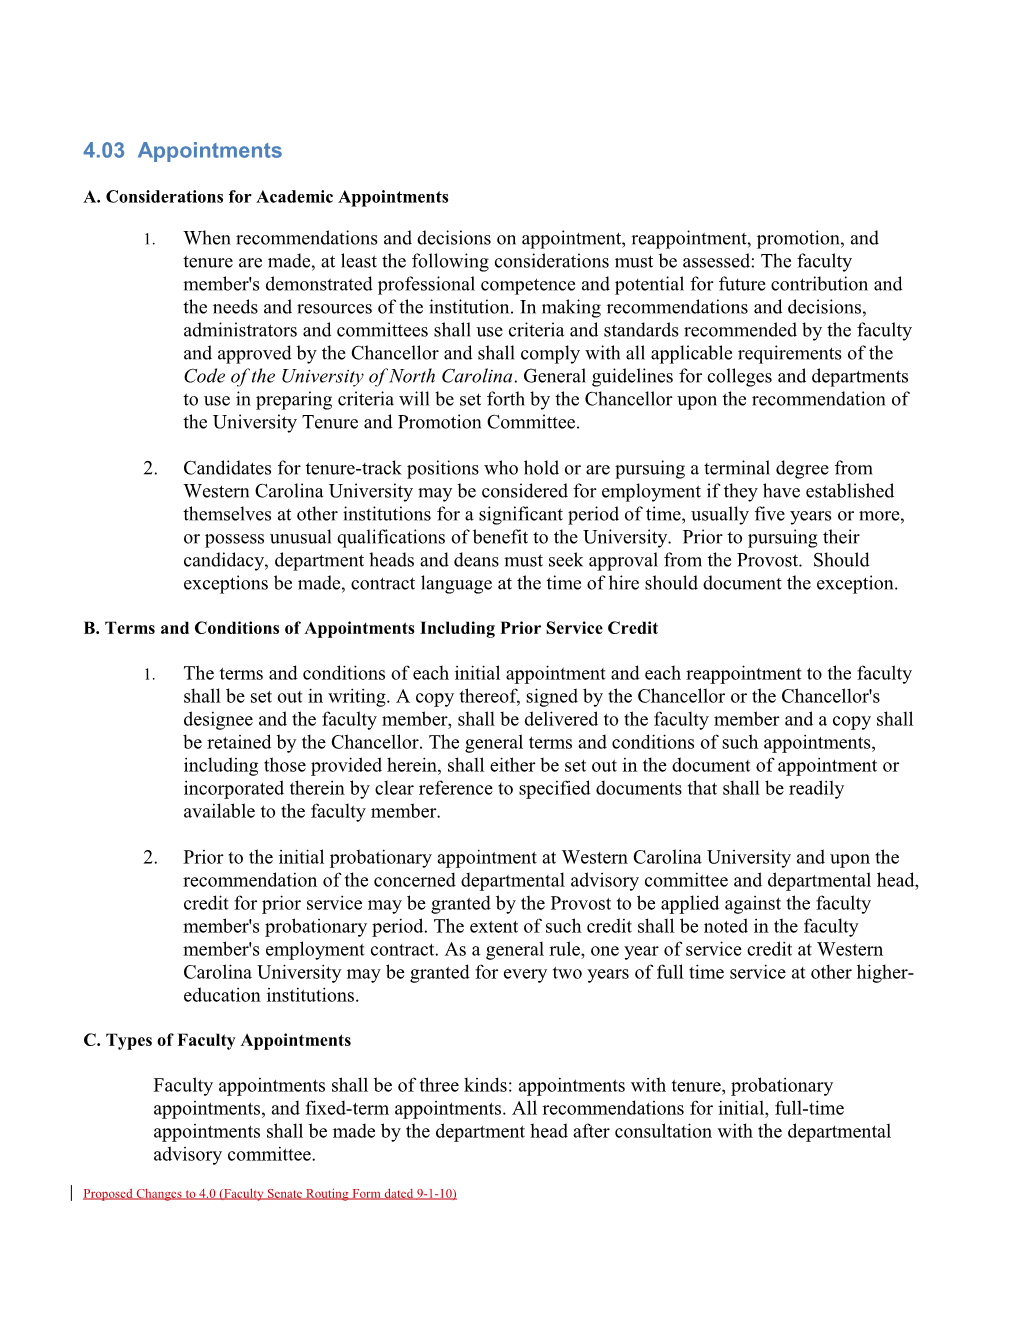 A. Considerations for Academic Appointments